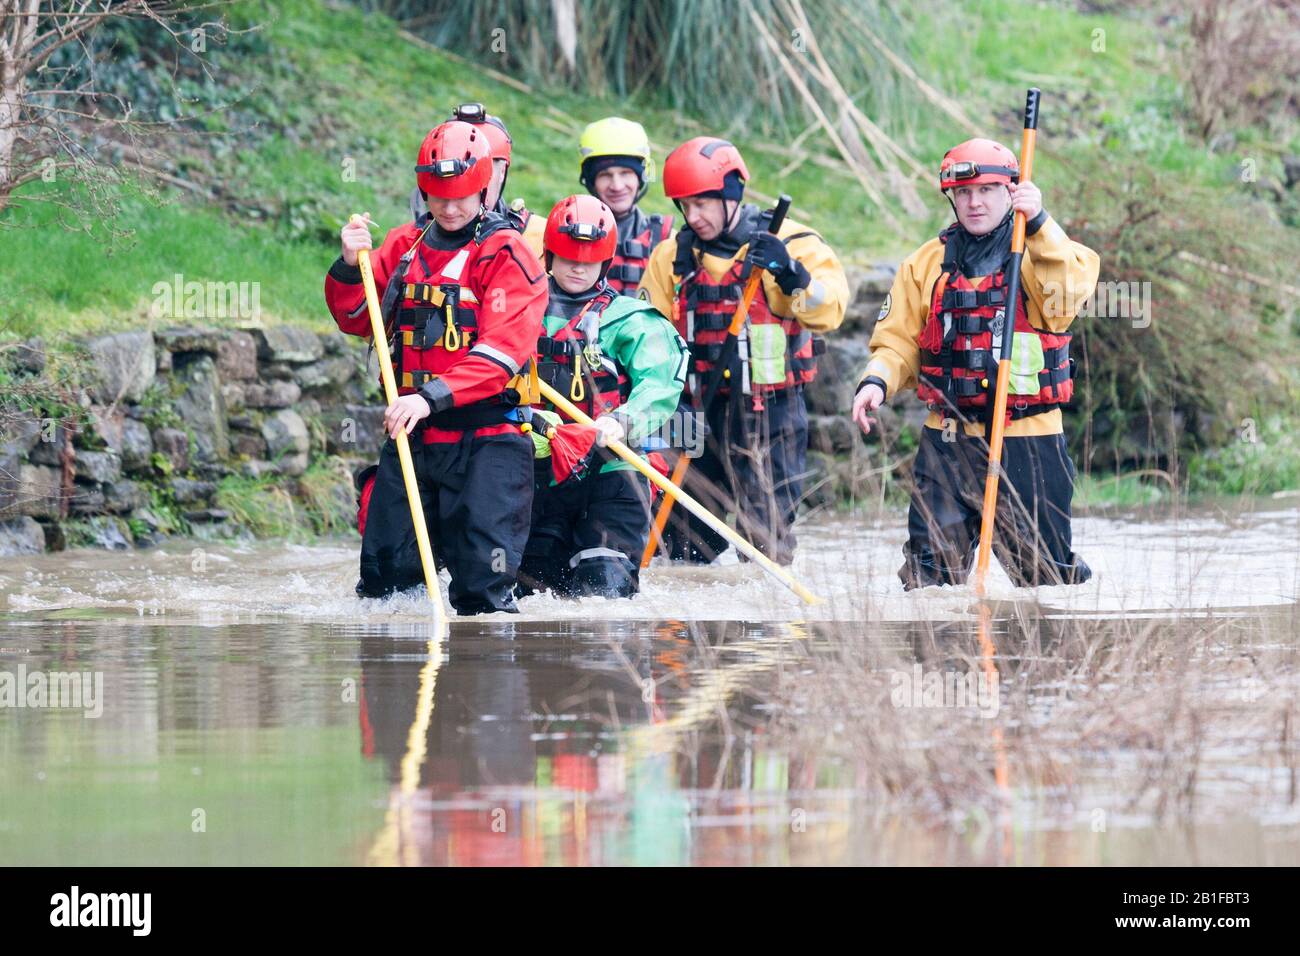 Ironbridge, Shropshire, UK. 25th Feb, 2020. Severe flood warning in place on the River Severn at Ironbridge, Shropshire, as rescue teams attempt to evacuate households in danger of flooding when the river levels peak later in the day (Tuesday). Credit: Peter Lopeman/Alamy Live News Stock Photo